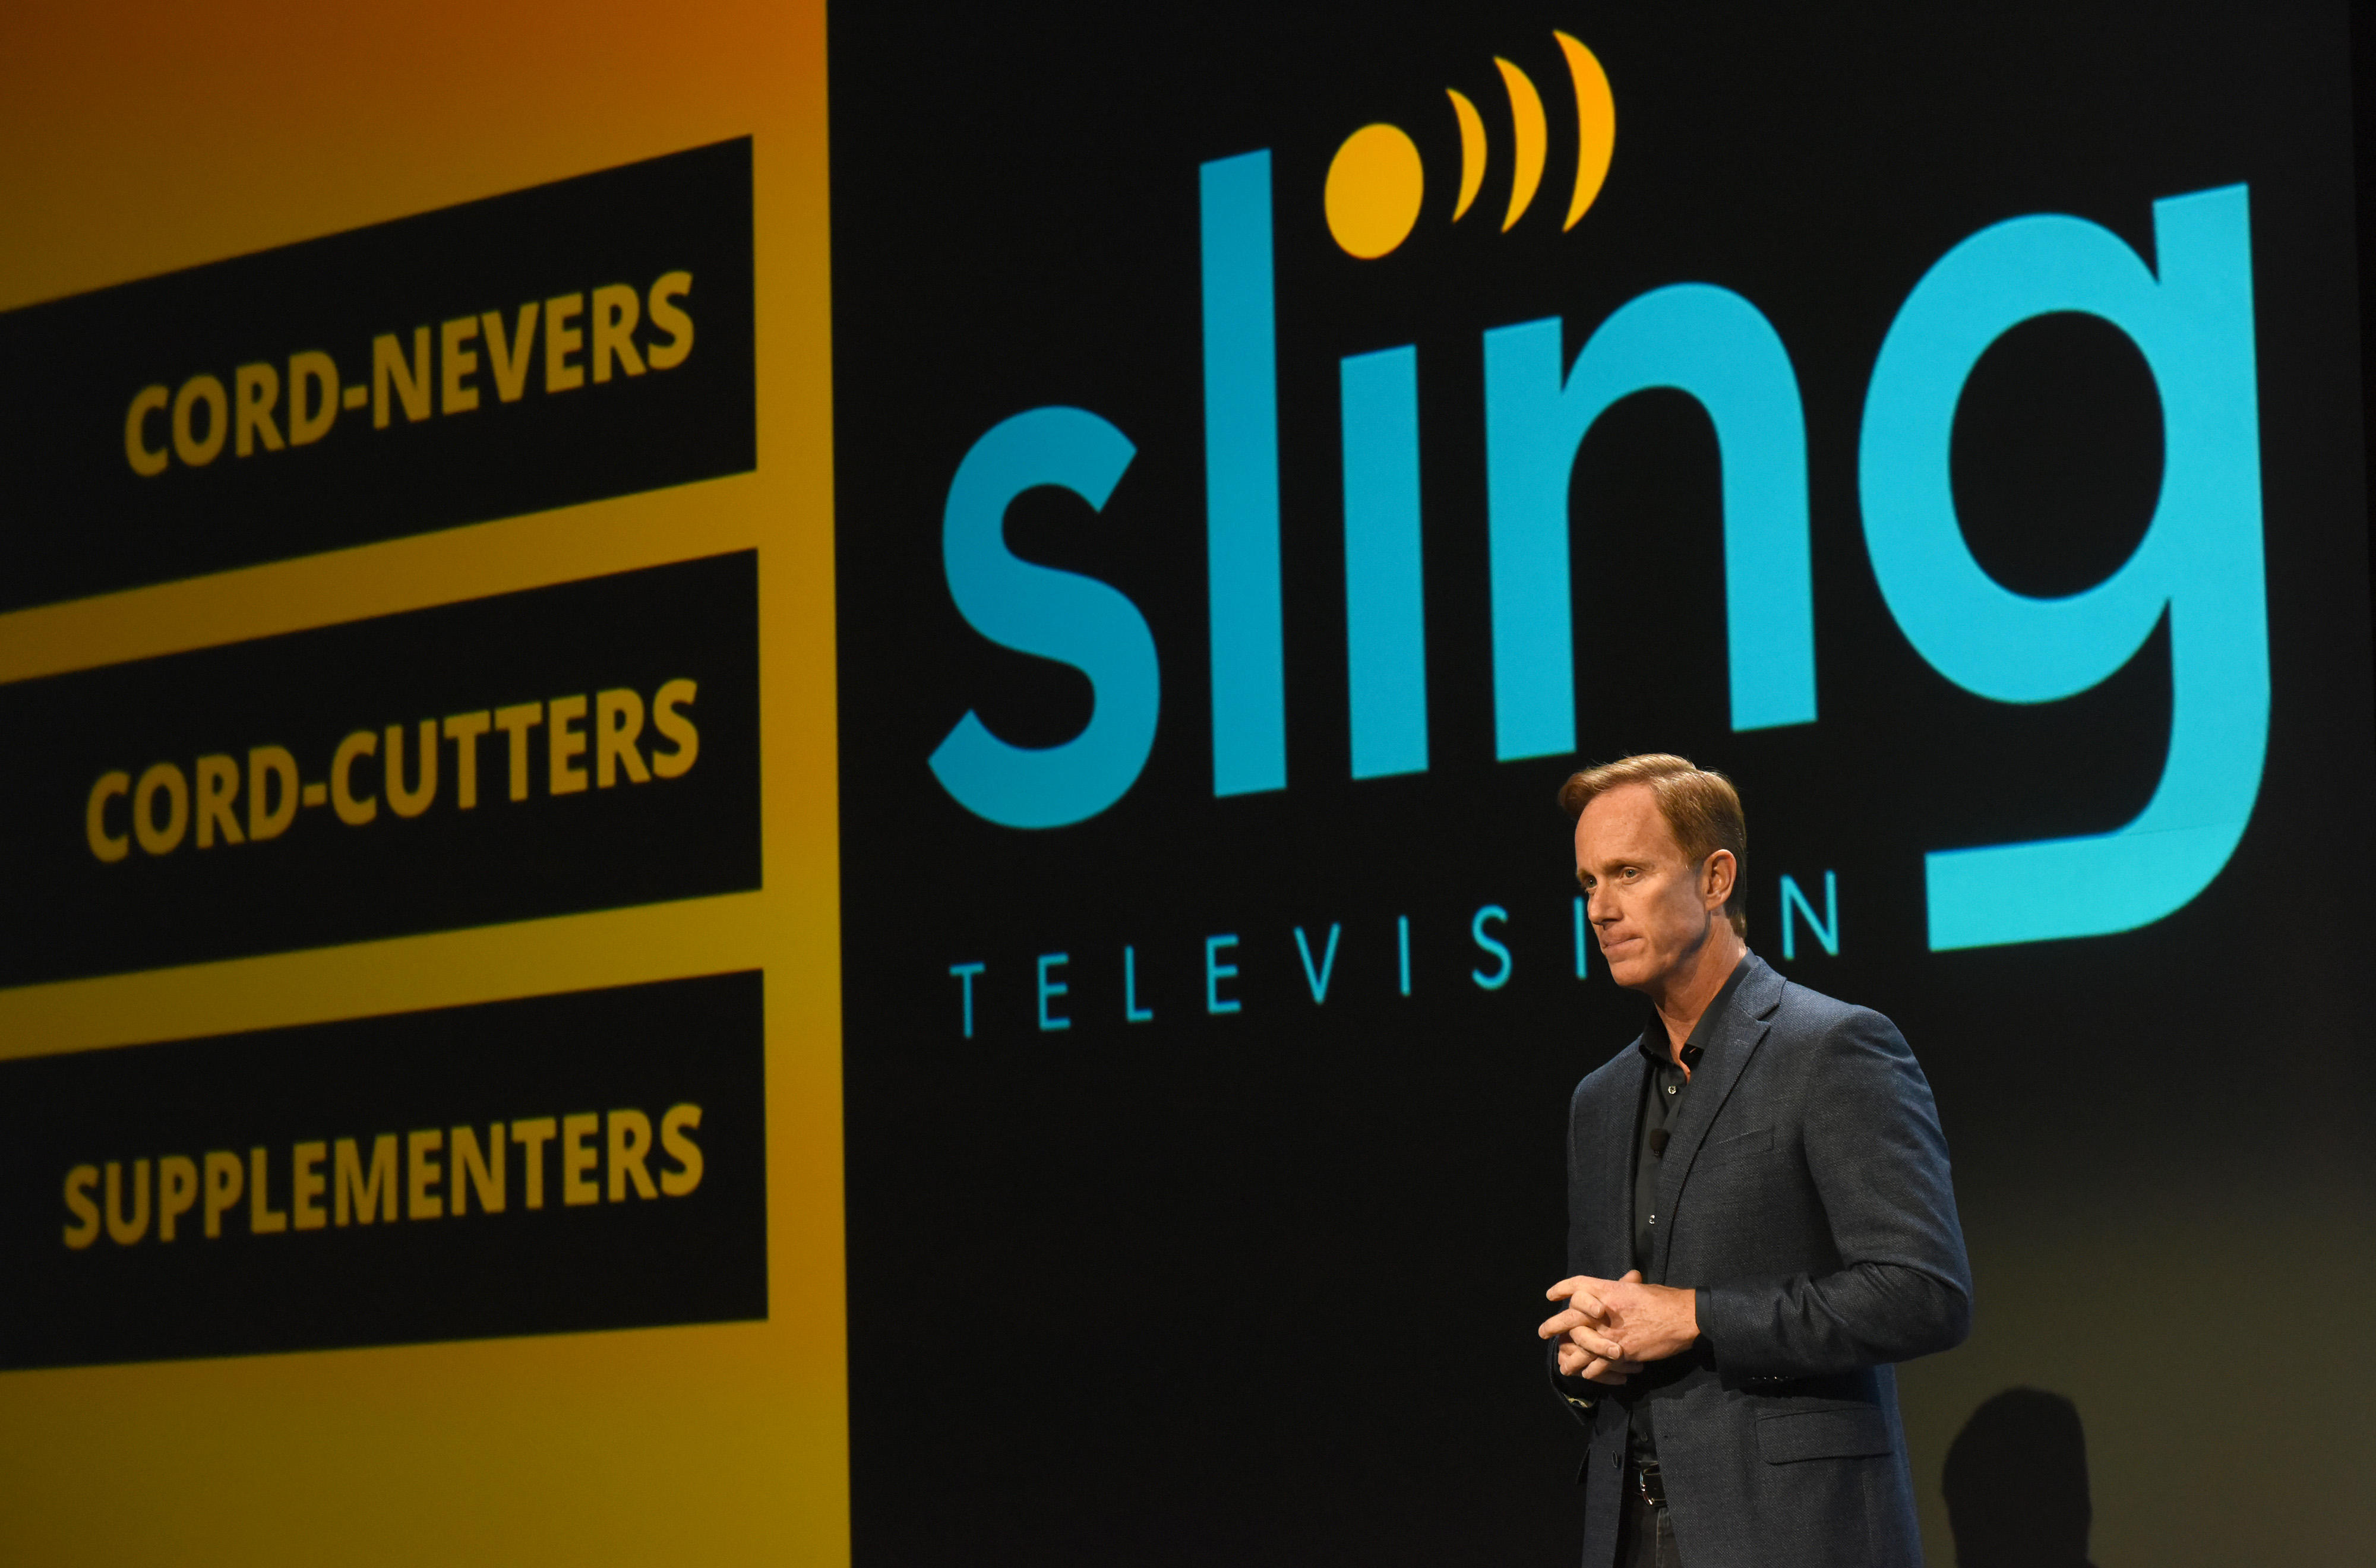 Roger Lynch, chief executive officer of Sling TV LLC, pauses while speaking during an event at the 2016 Consumer Electronics Show (CES) in Las Vegas, Nevada, U.S., on Tuesday, Jan. 5, 2016. (Bloomberg—Bloomberg via Getty Images)